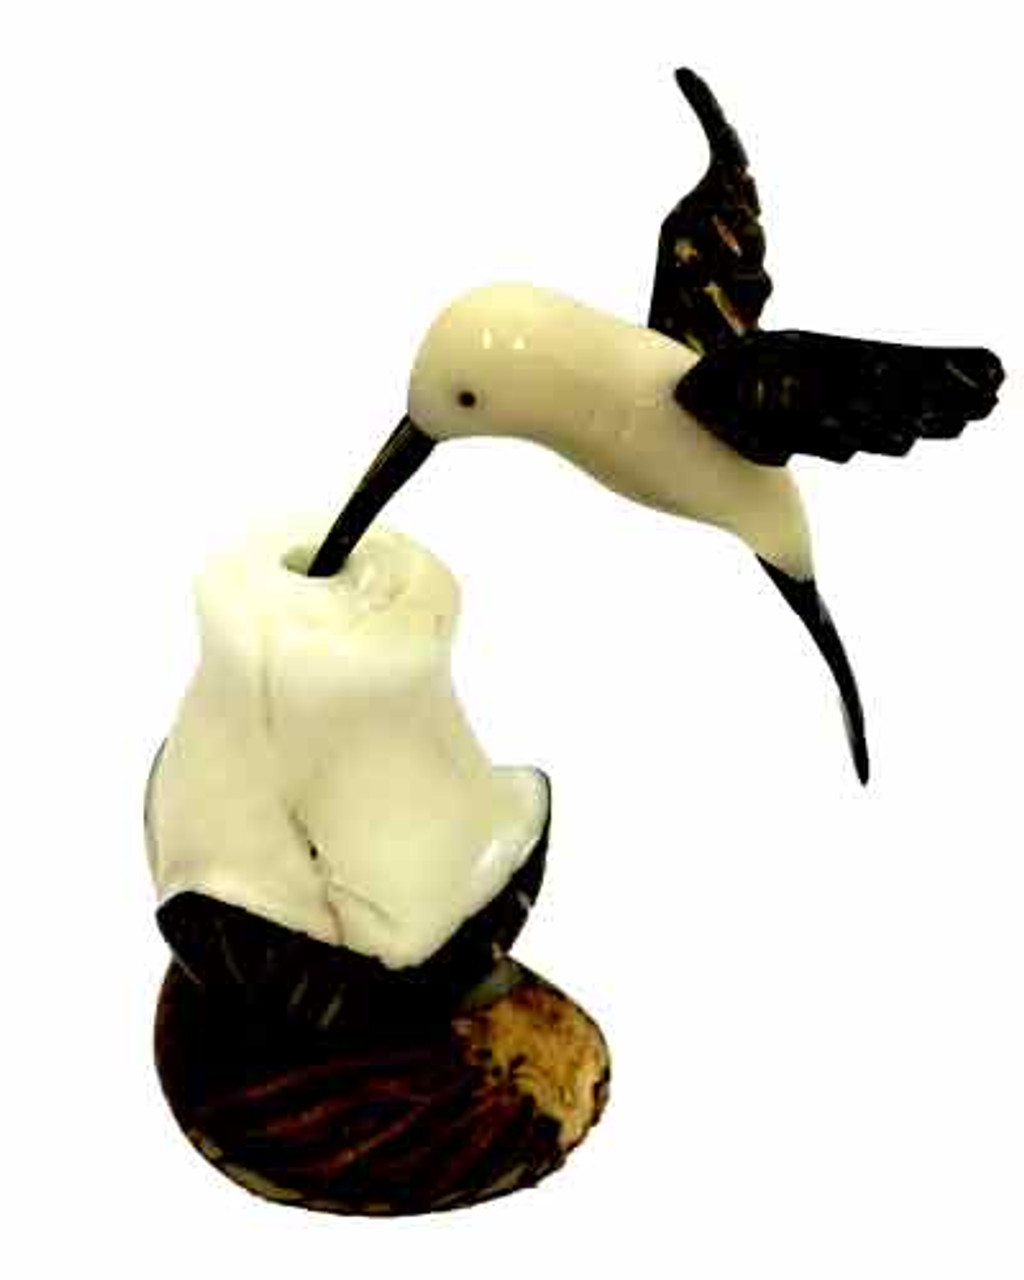 A hummingbird feeding on a rose made from Tagua nuts.  The outside of the tagua nut is brown with the inside being an ivory white.